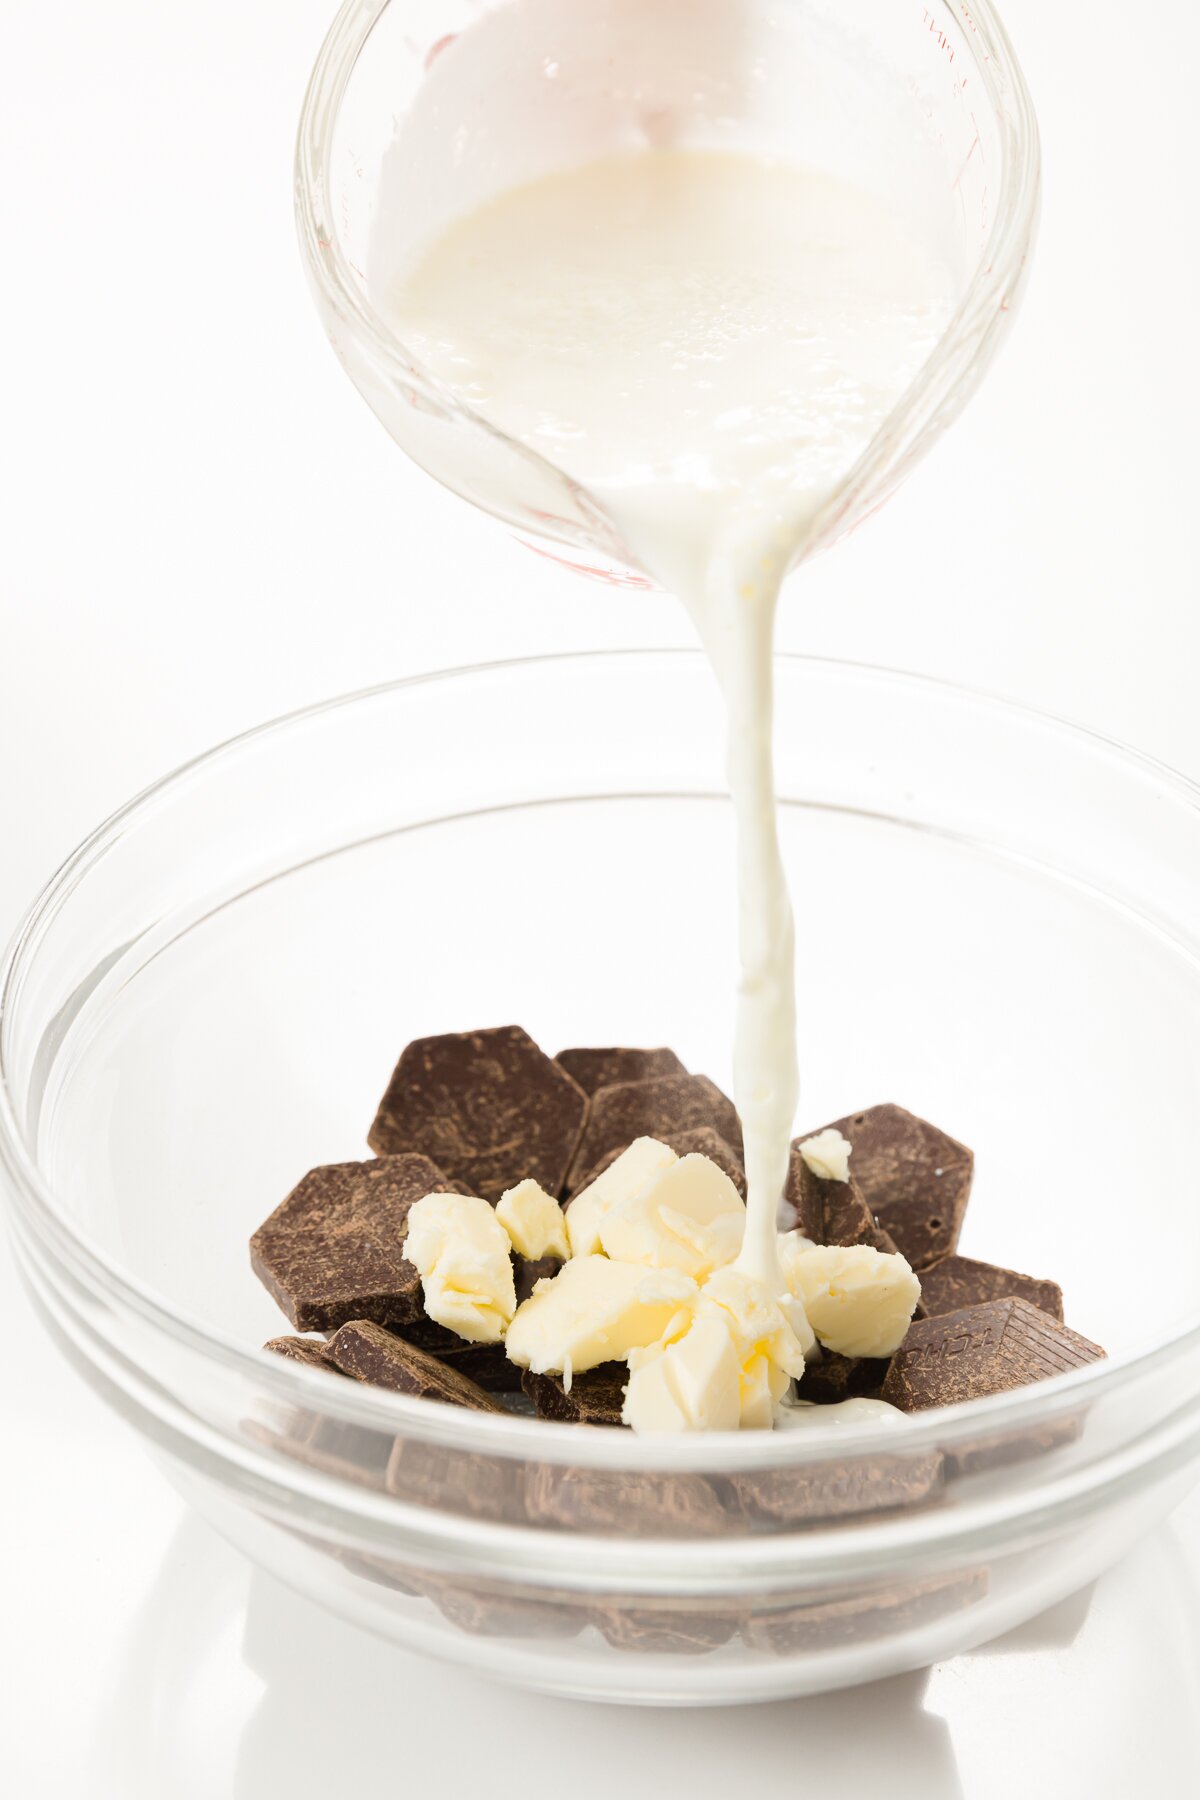 Pouring cream over chocolate and butter in a glass bowl